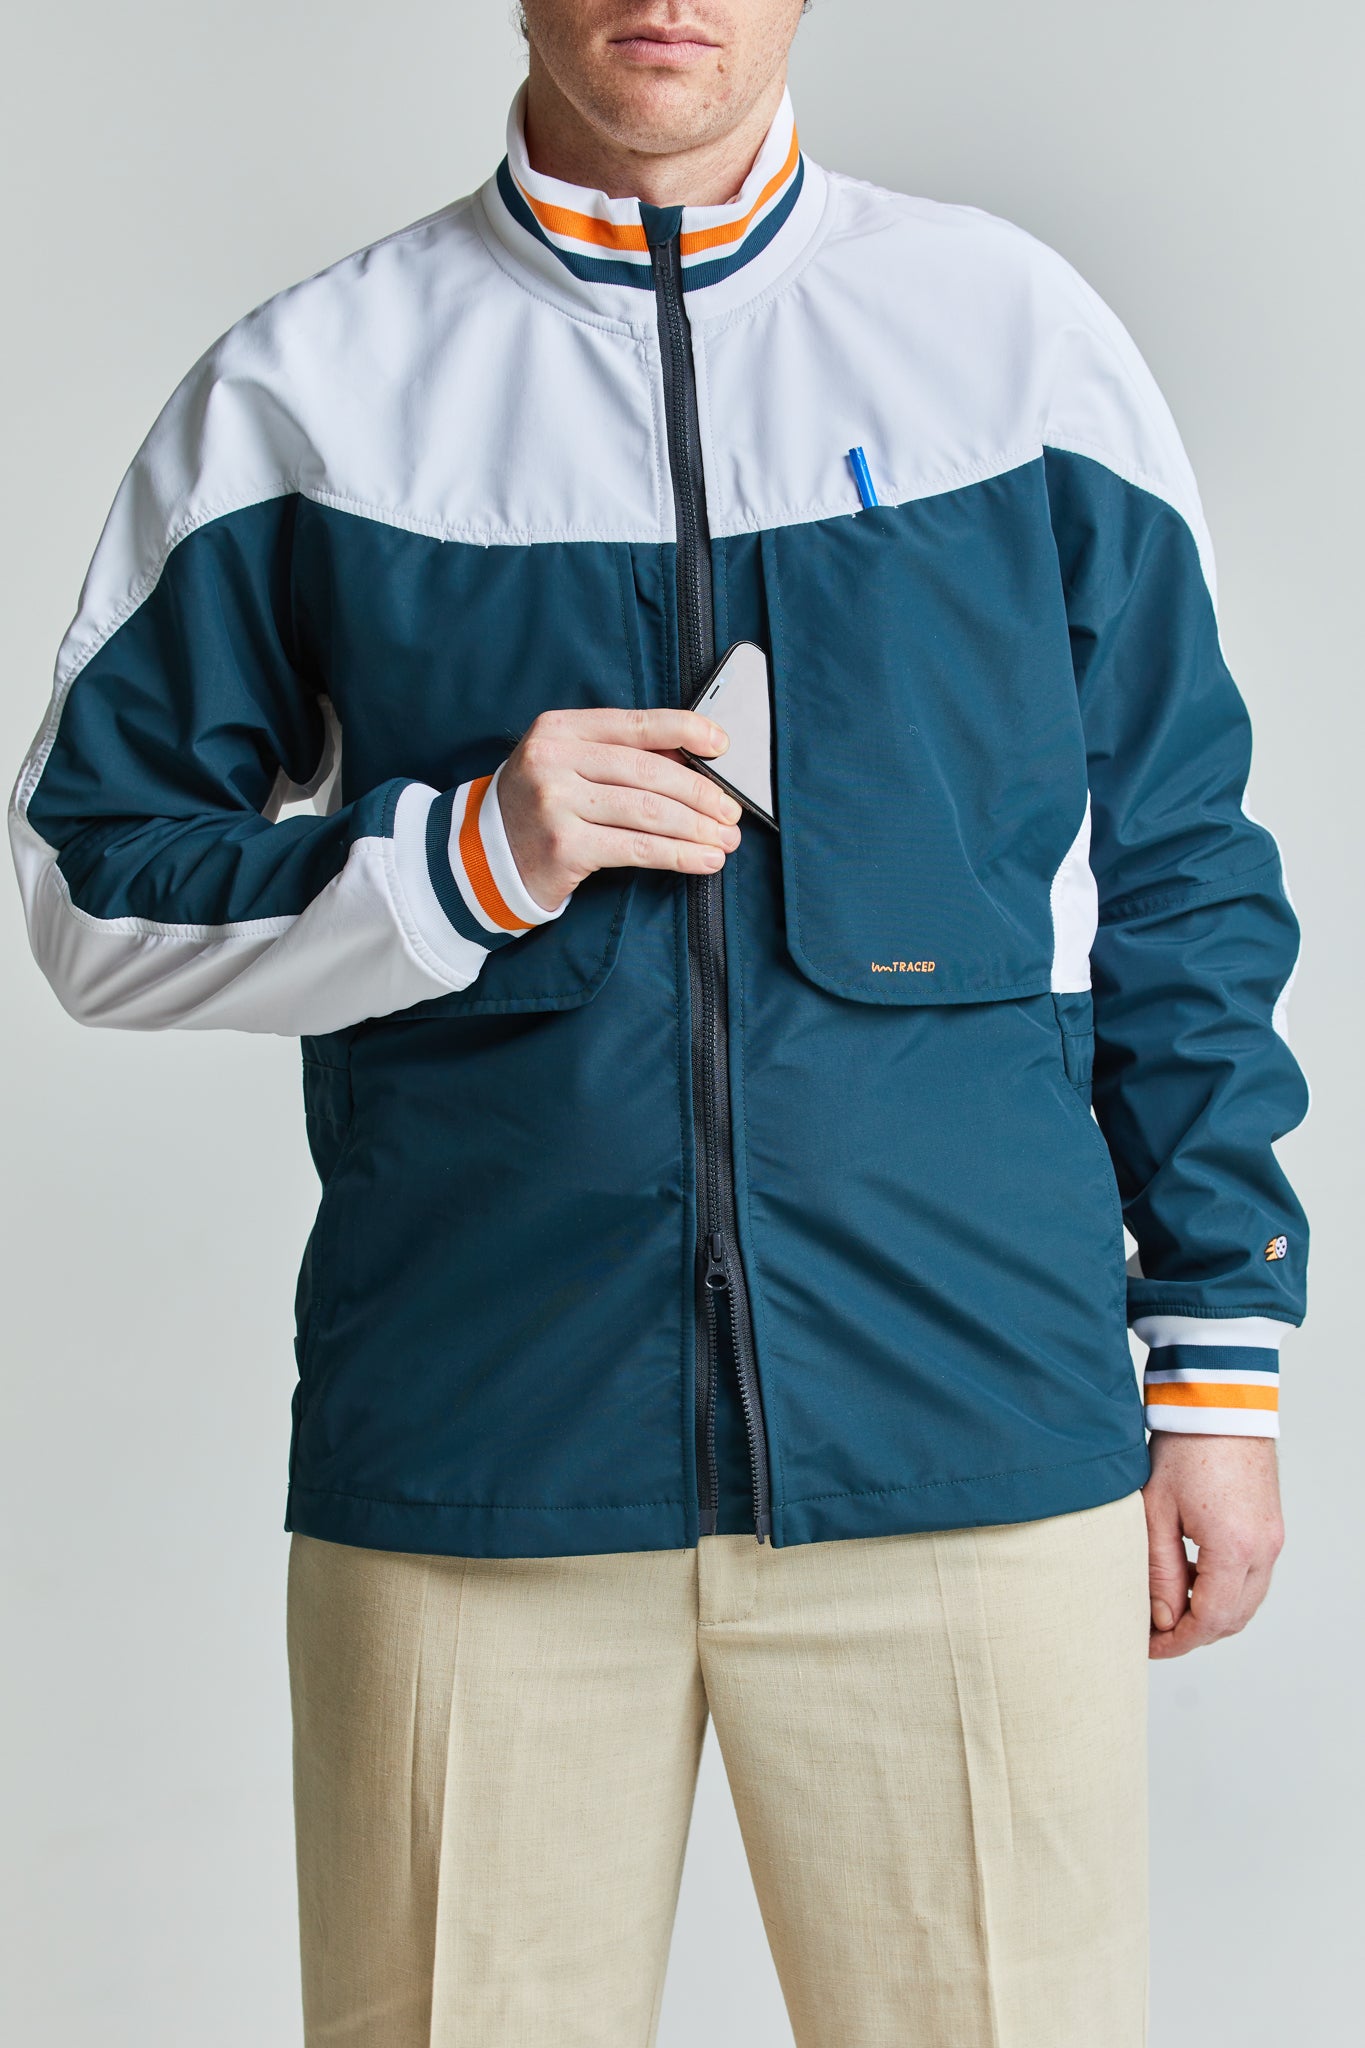 Golf jacket men Untraced Blue and White Recycled and bluesign approved materials Untraced Golfing